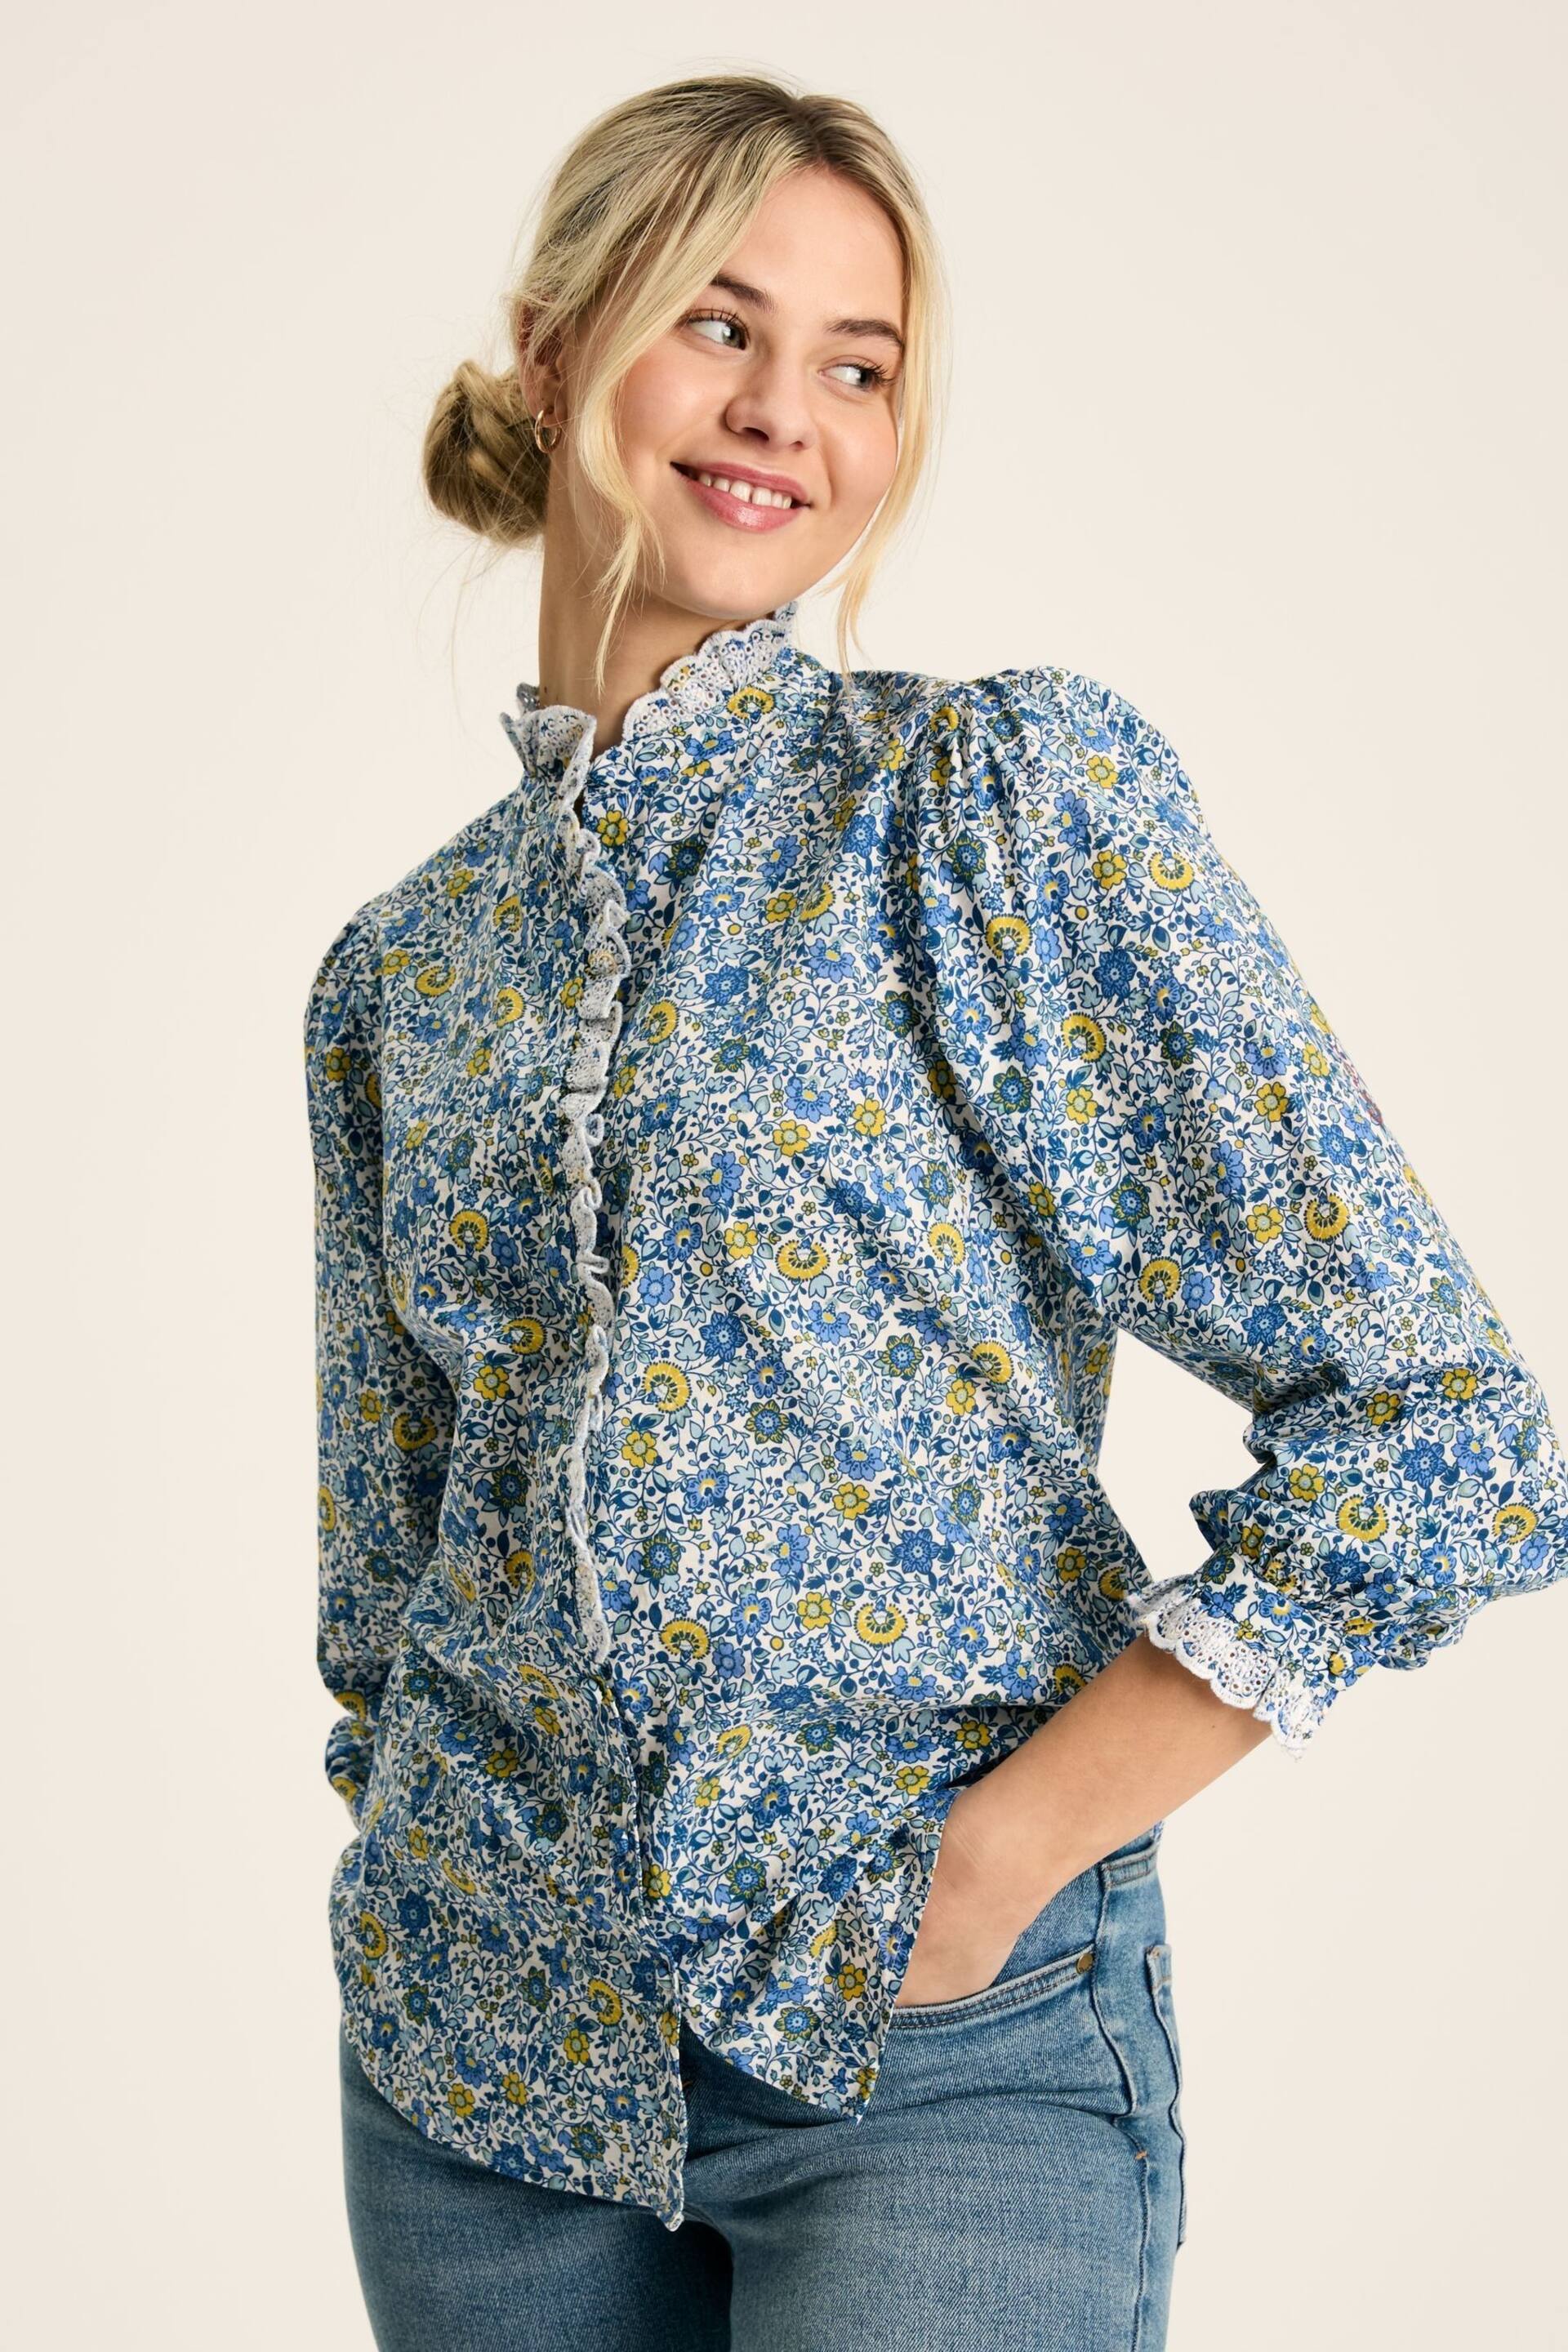 Joules Valentina Blue/White Broderie Trim Blouse - Image 1 of 6